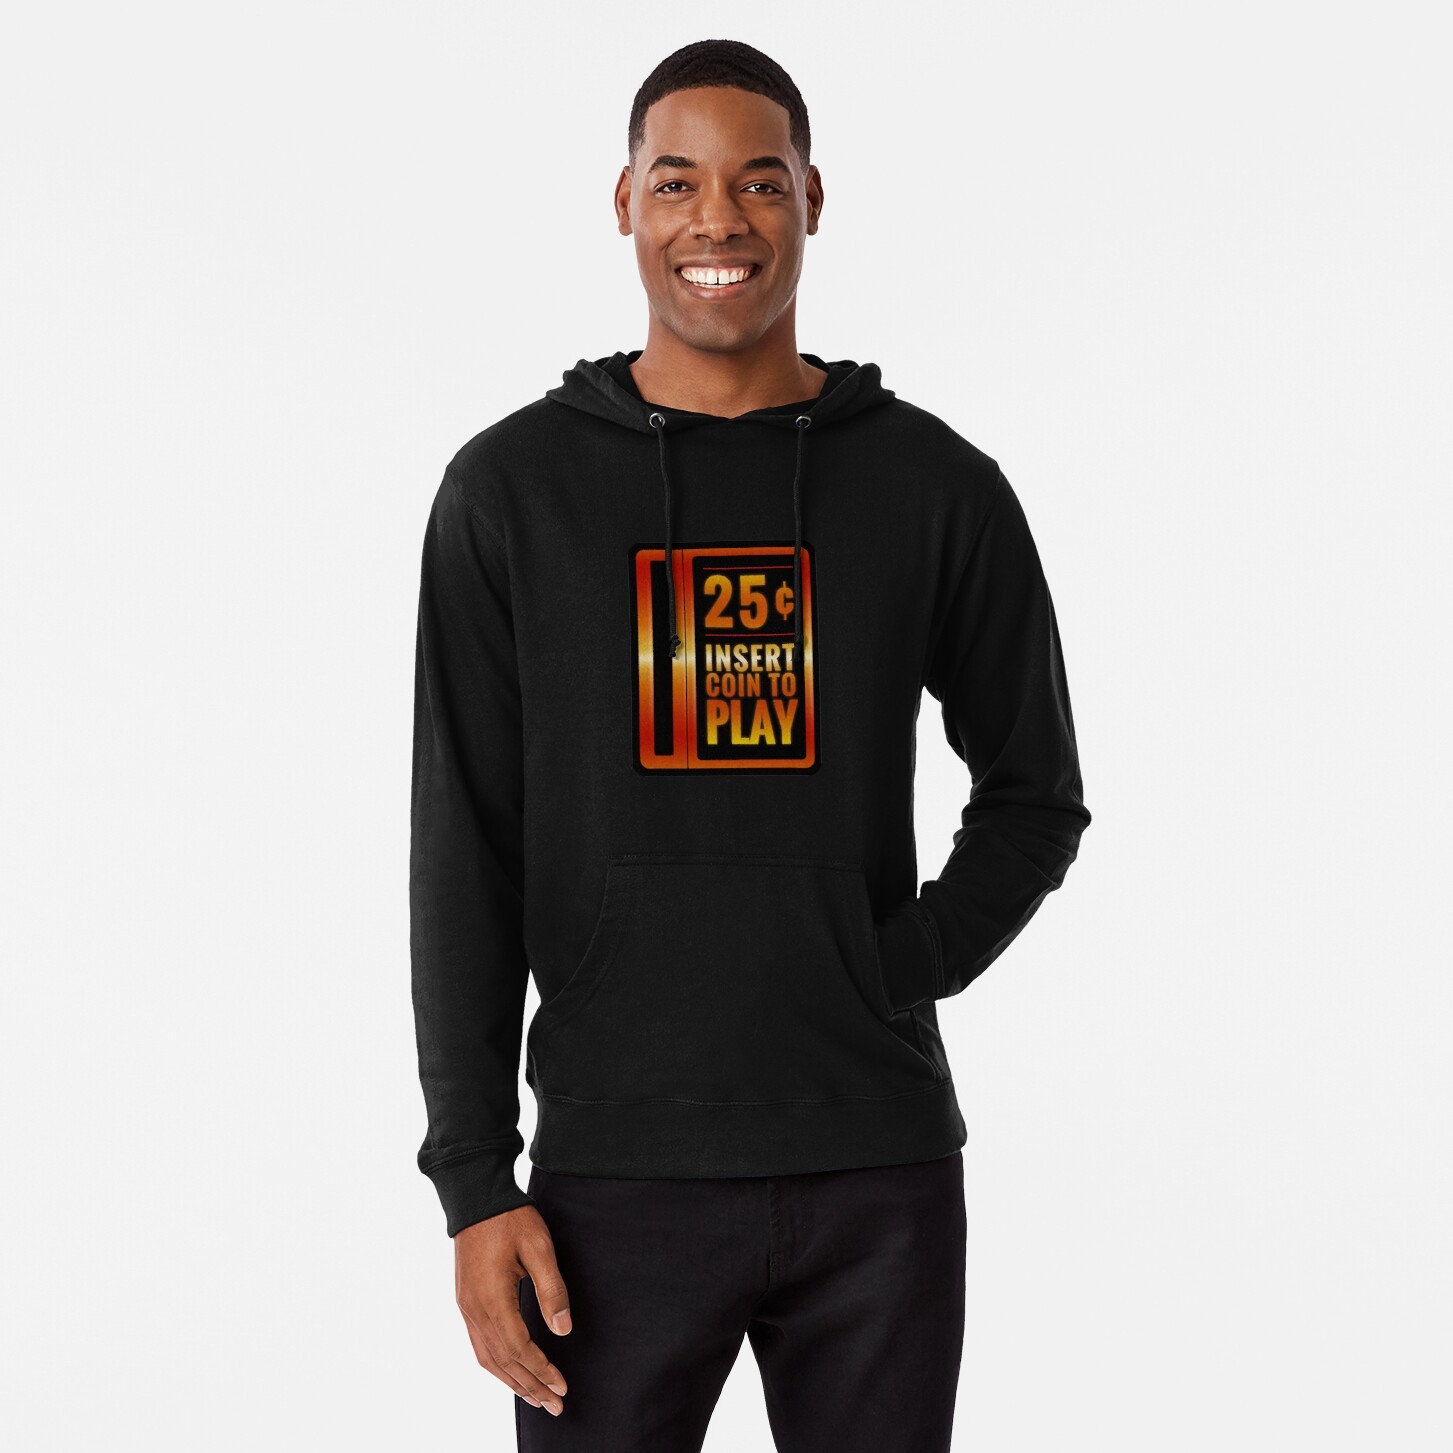 Insert 25¢ to play classic arcade coin slot - Lightweight Hoodie by NTK Apparel